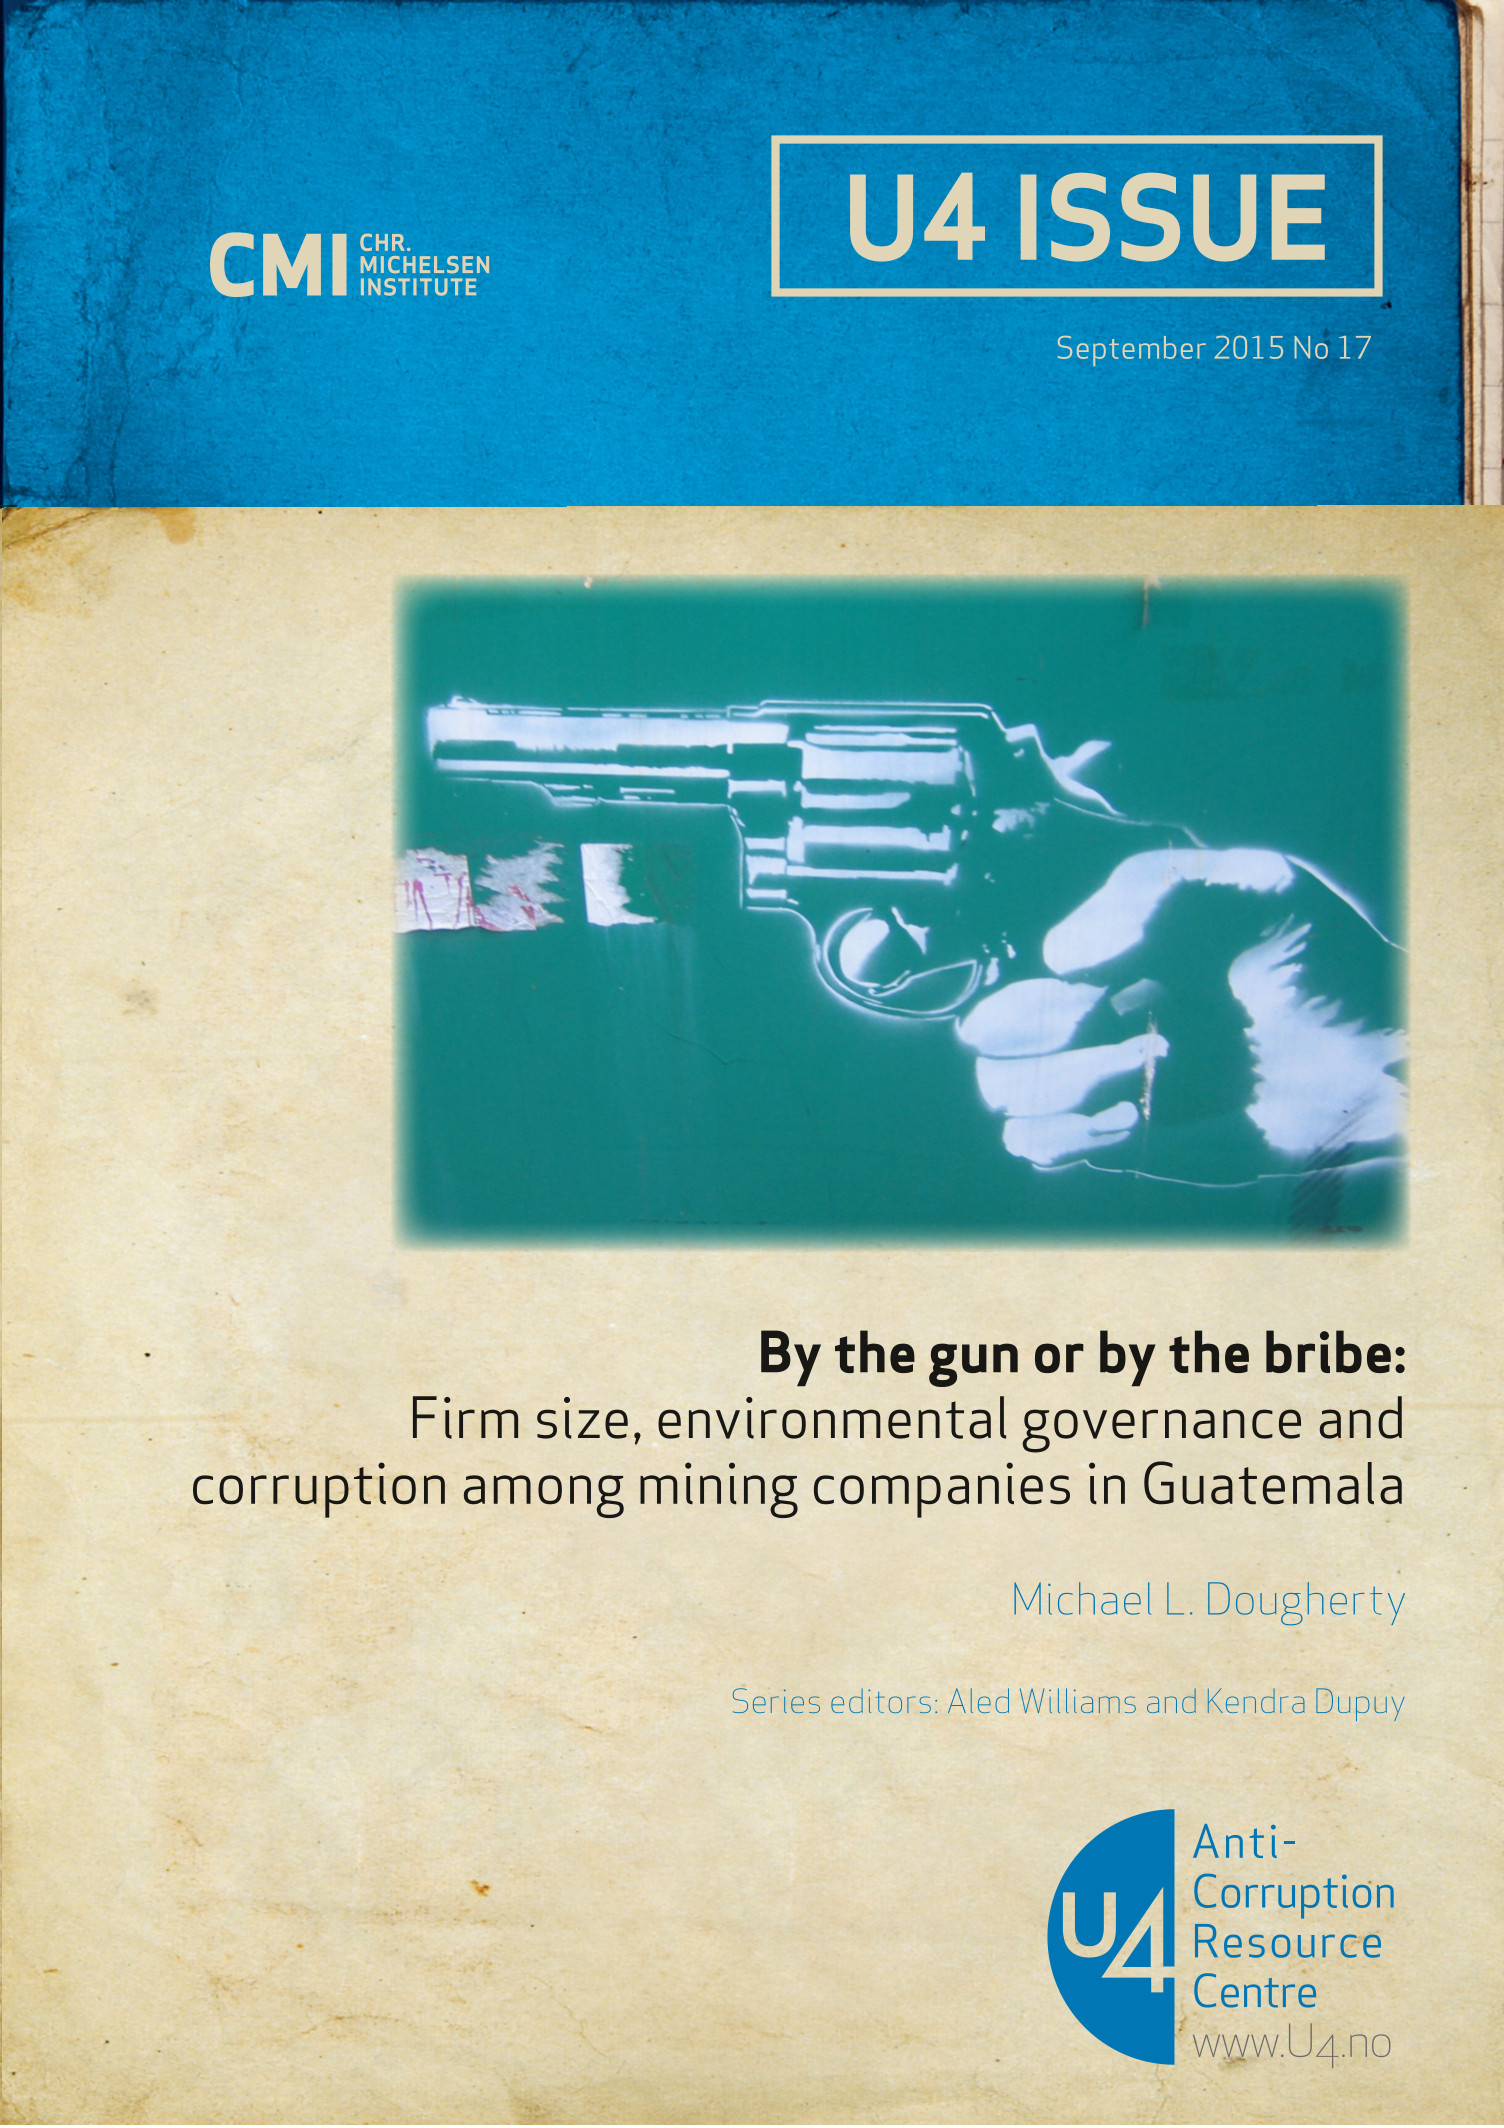 By the gun or by the bribe: Firm size, environmental governance and corruption among mining companies in Guatemala